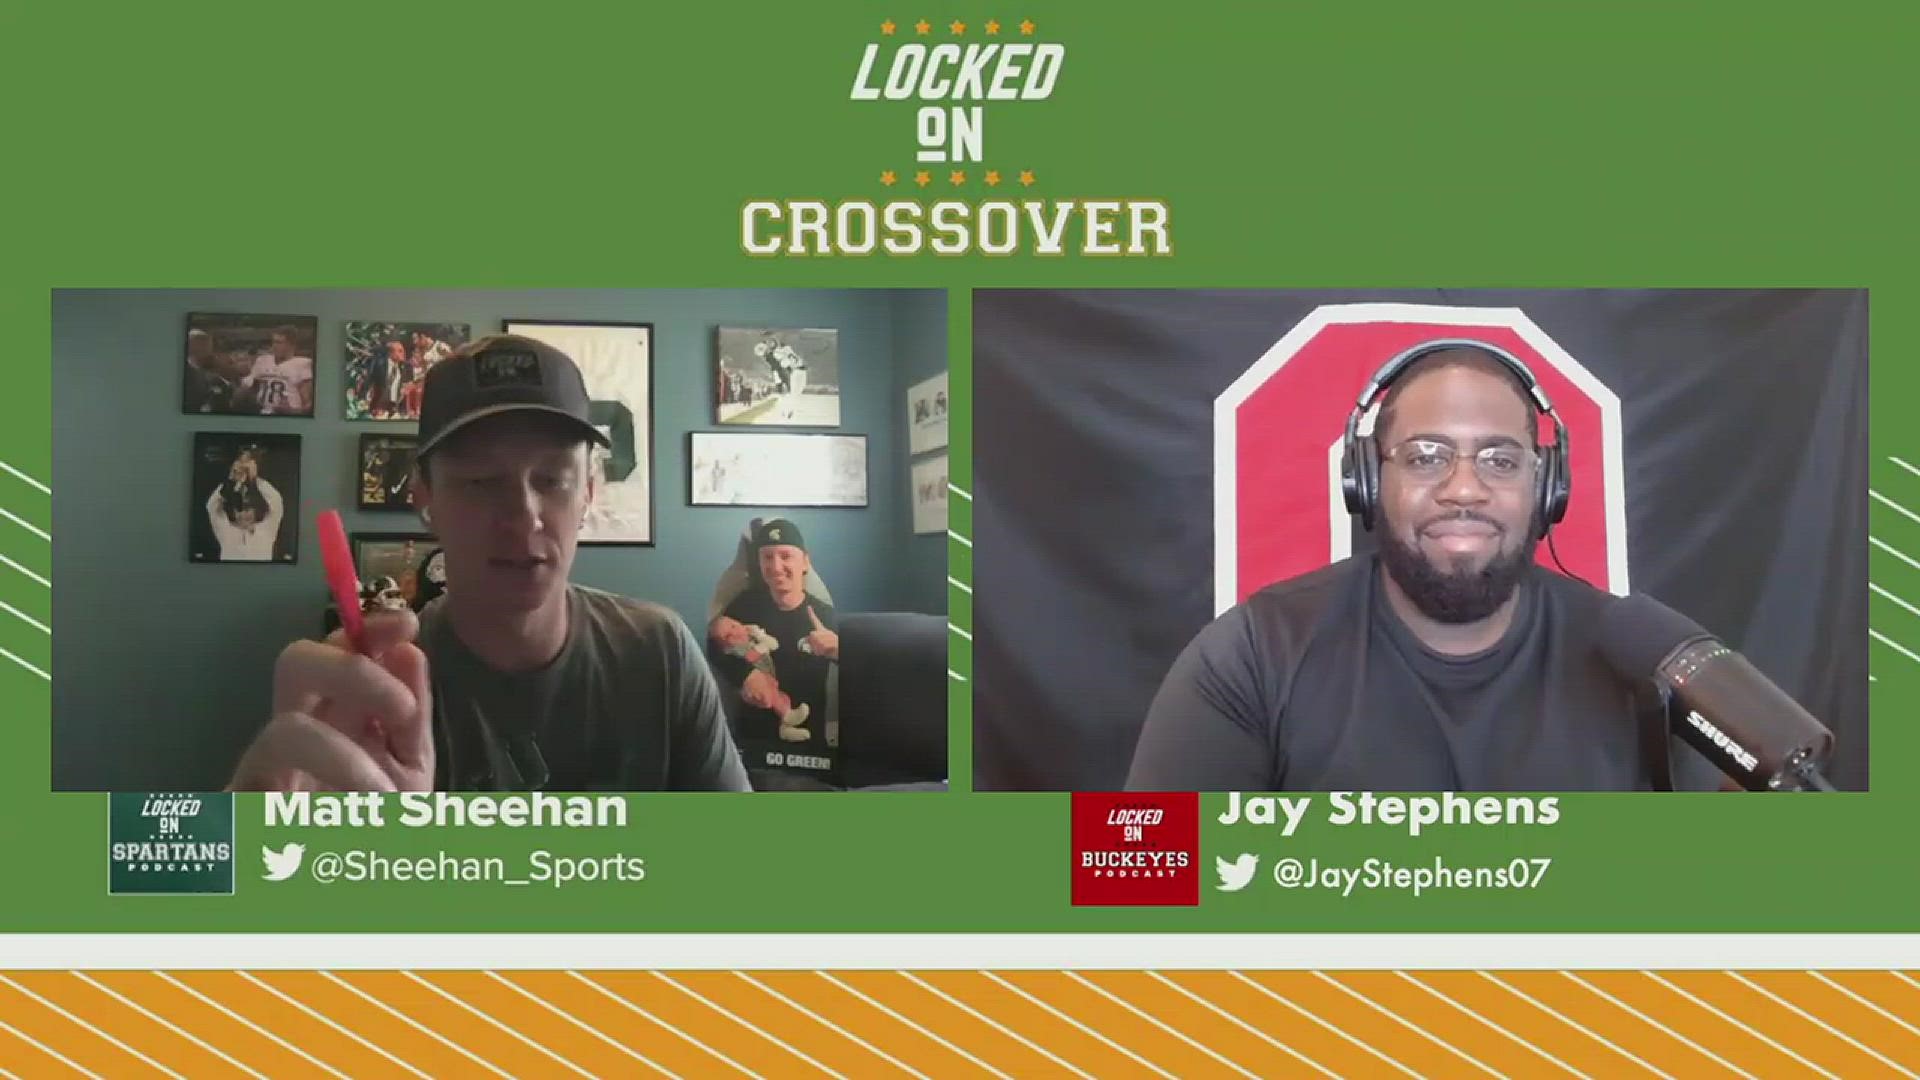 We chat it up with Jay Stephens of Locked On Buckeyes to breakdown everything about this weekend's matchup.